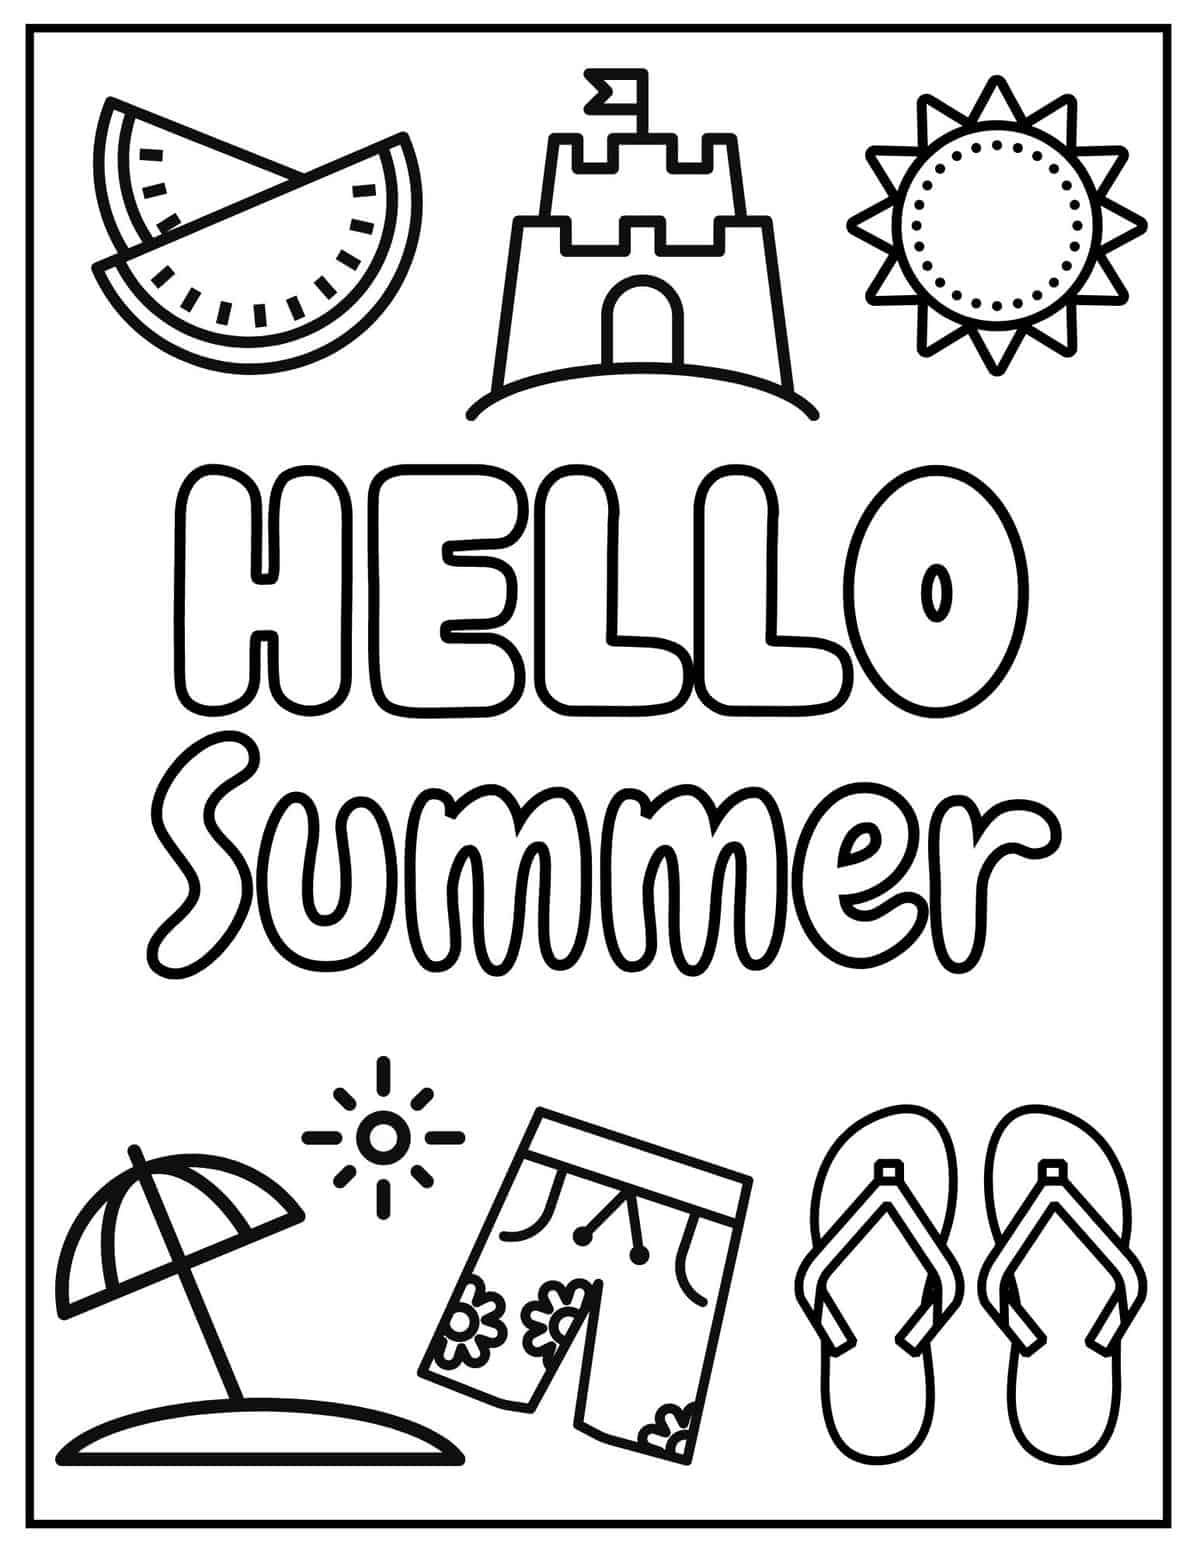 preschool-summer-coloring-pages-peacecommission-kdsg-gov-ng